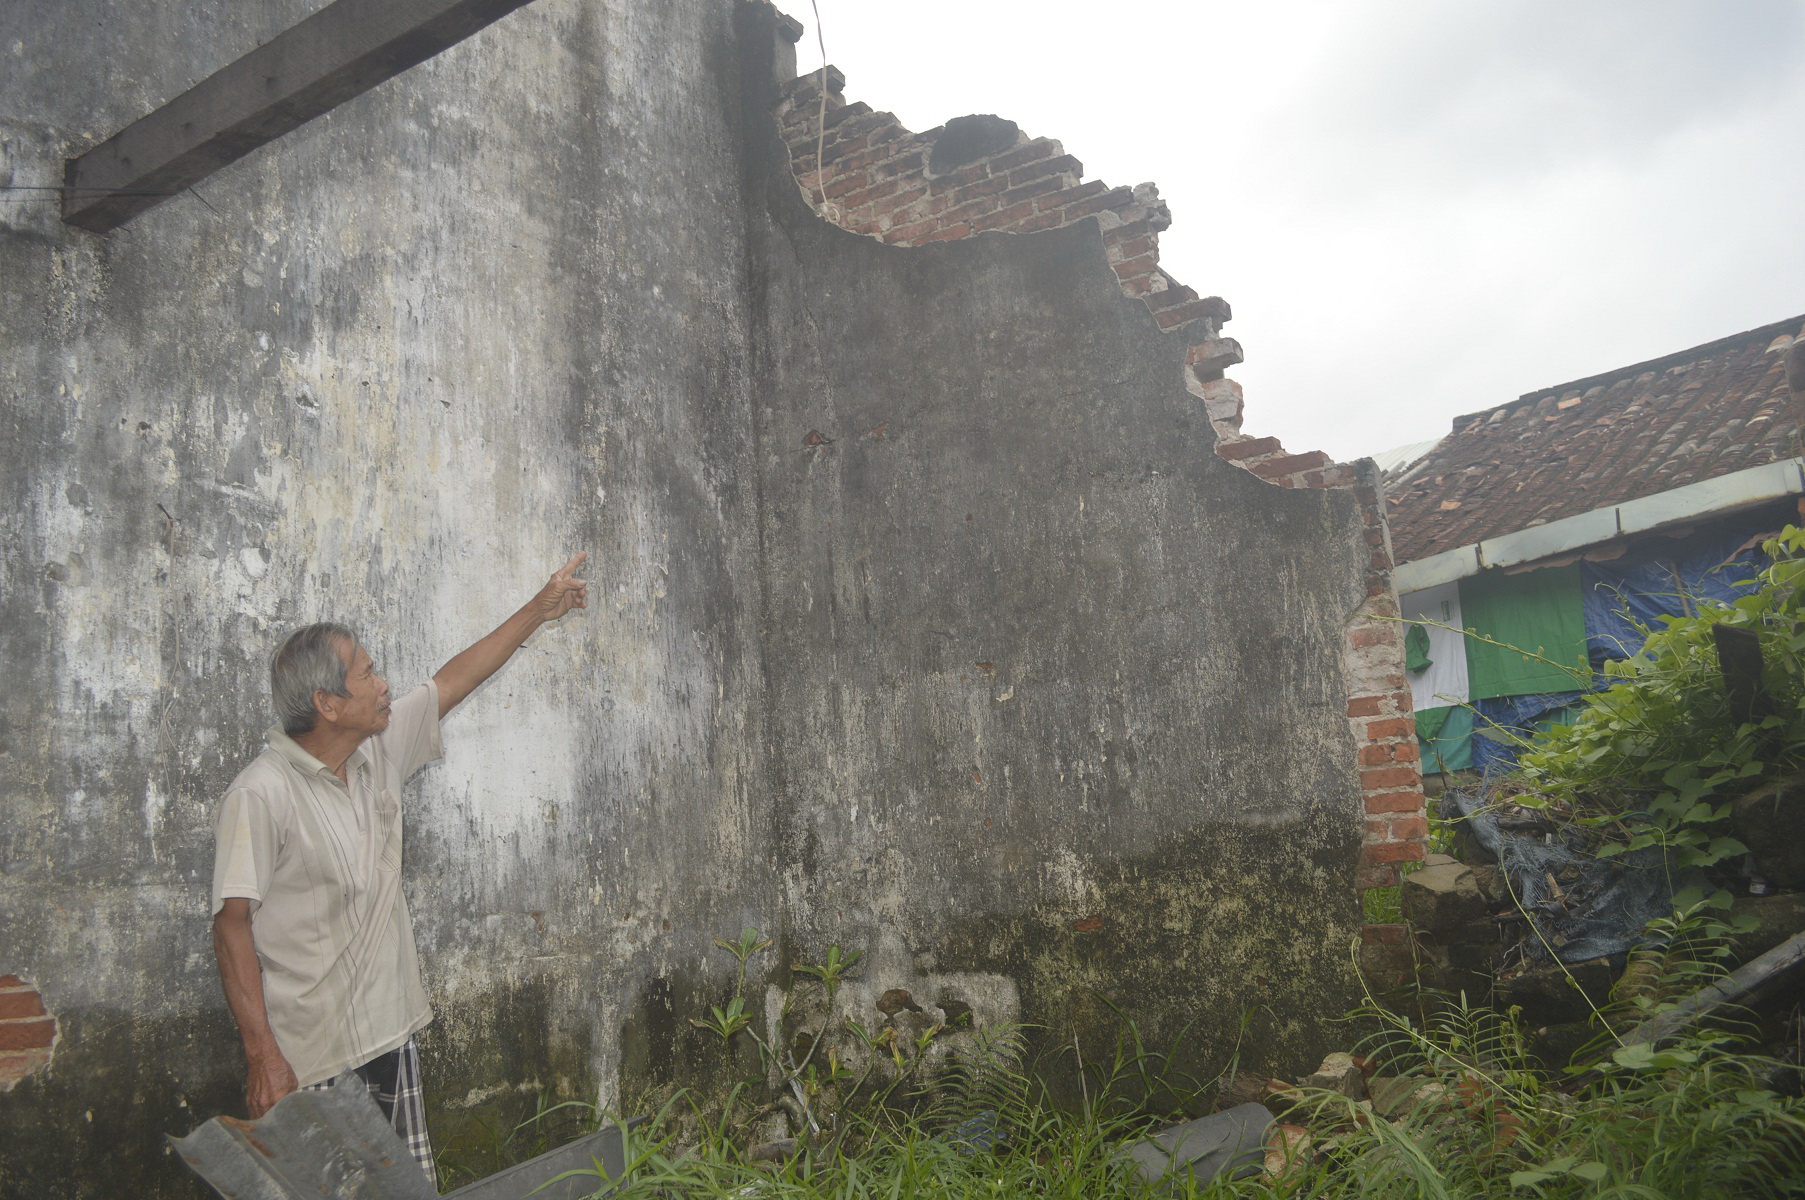 Hoi An town considers dismantling irreversibly damaged old houses